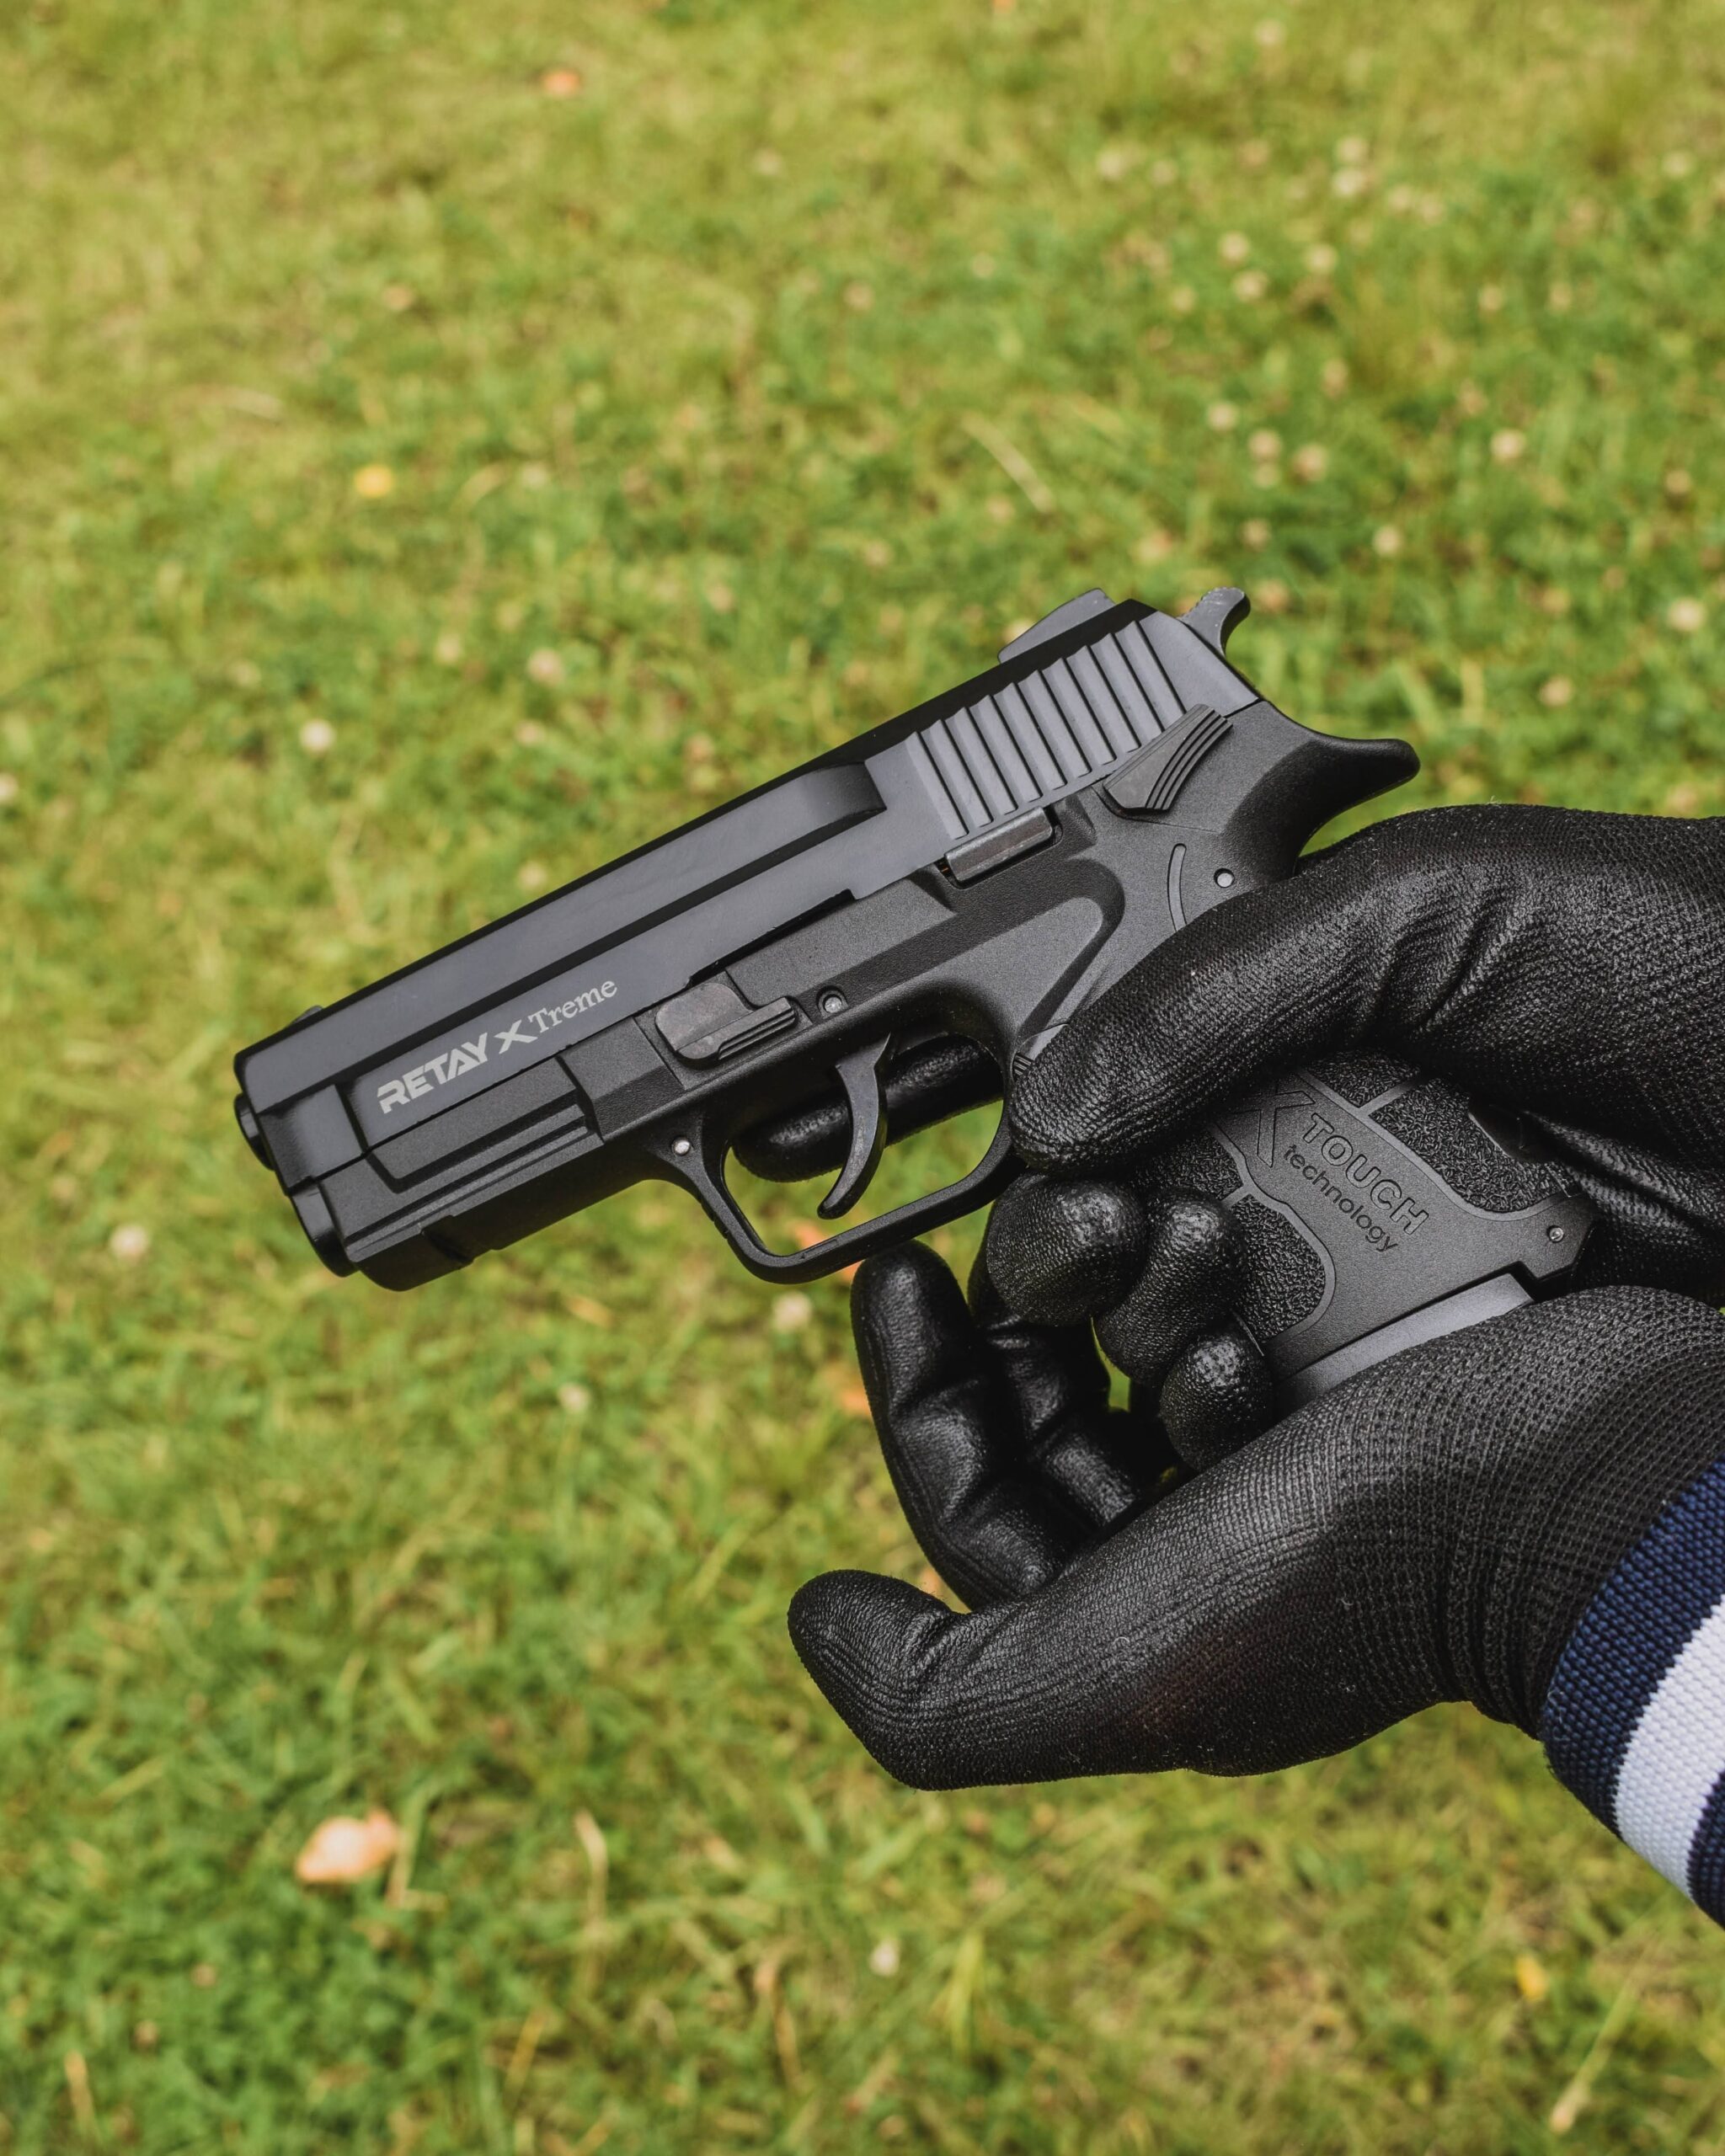 5 Must-Have Gun Accessories to Improve Your Kit